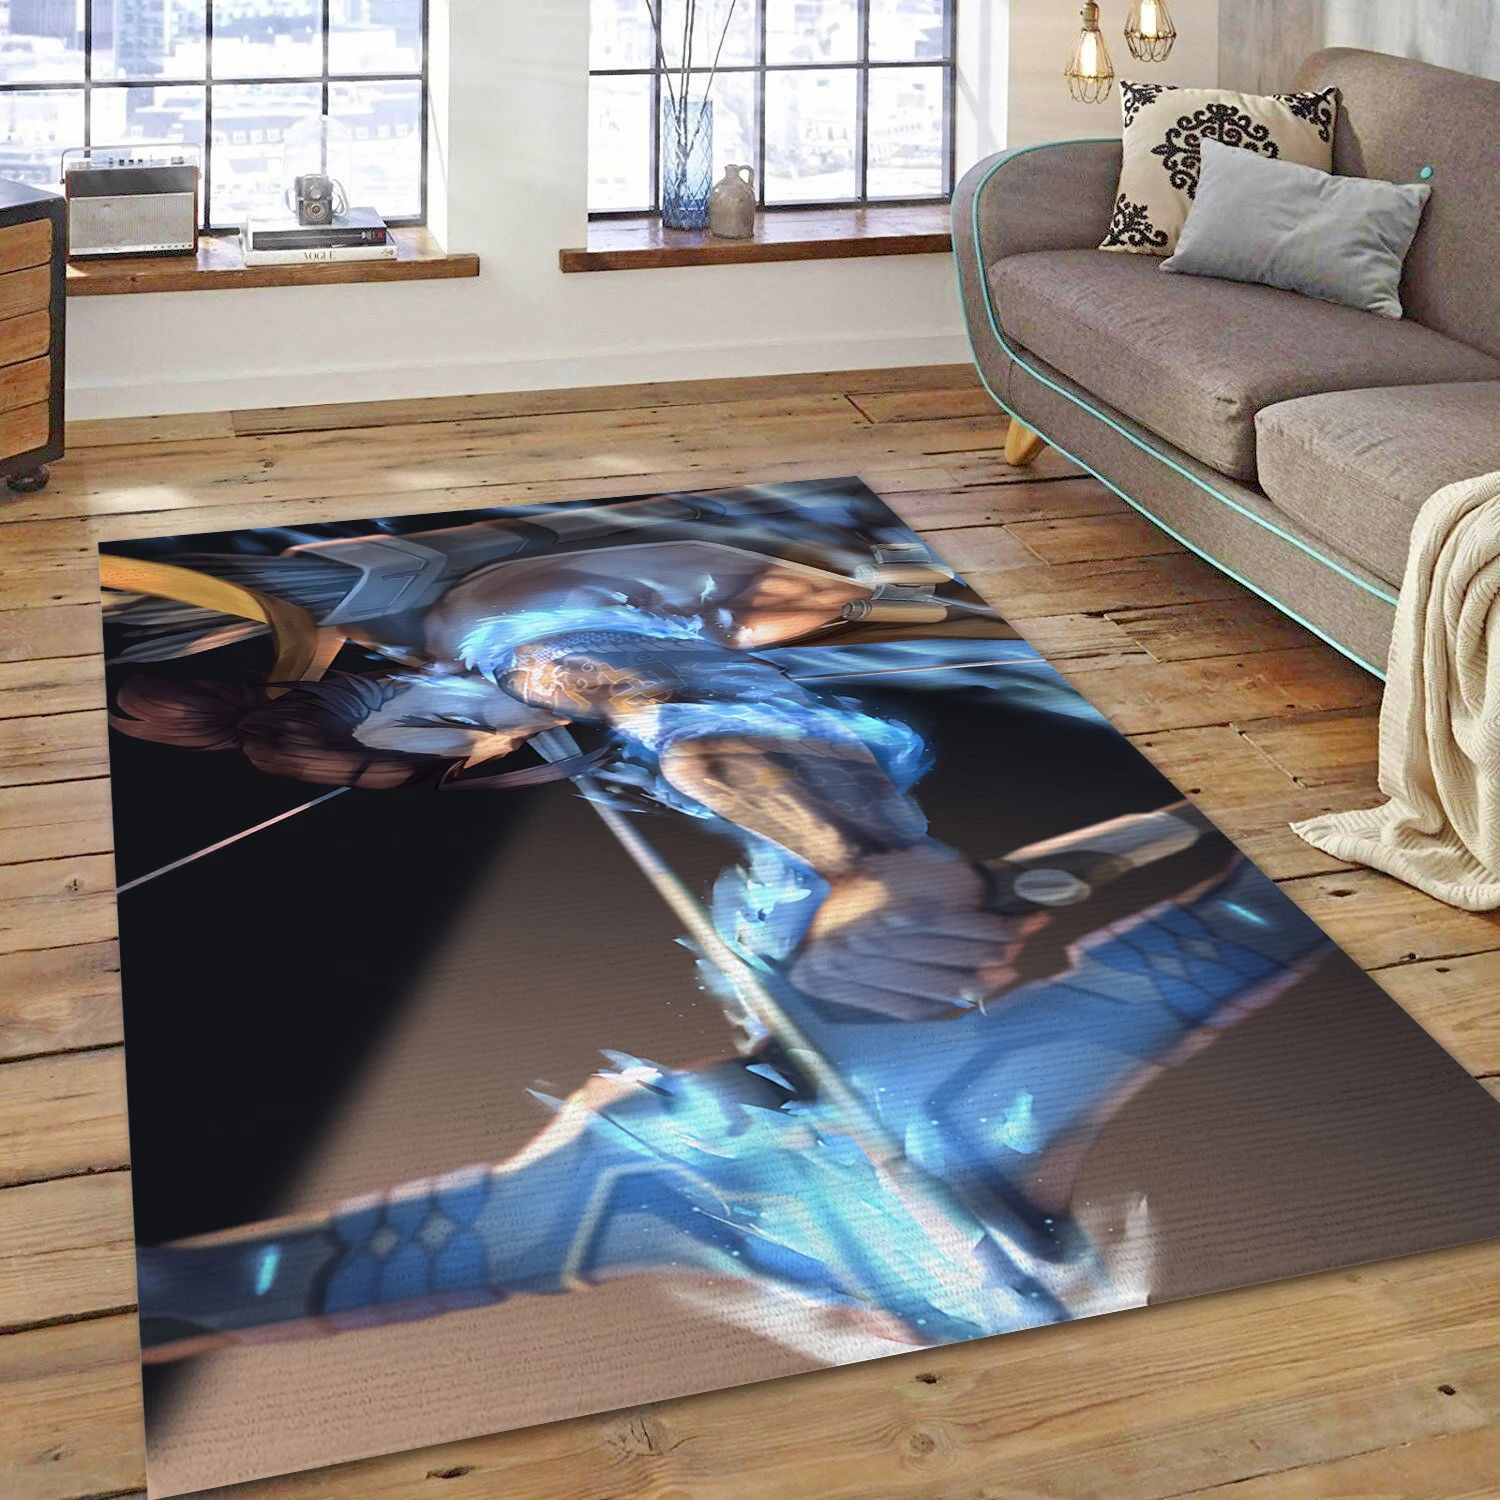 Hanzo Overwatch Gaming Area Rug, Living Room Rug - Family Gift US Decor - Indoor Outdoor Rugs 1